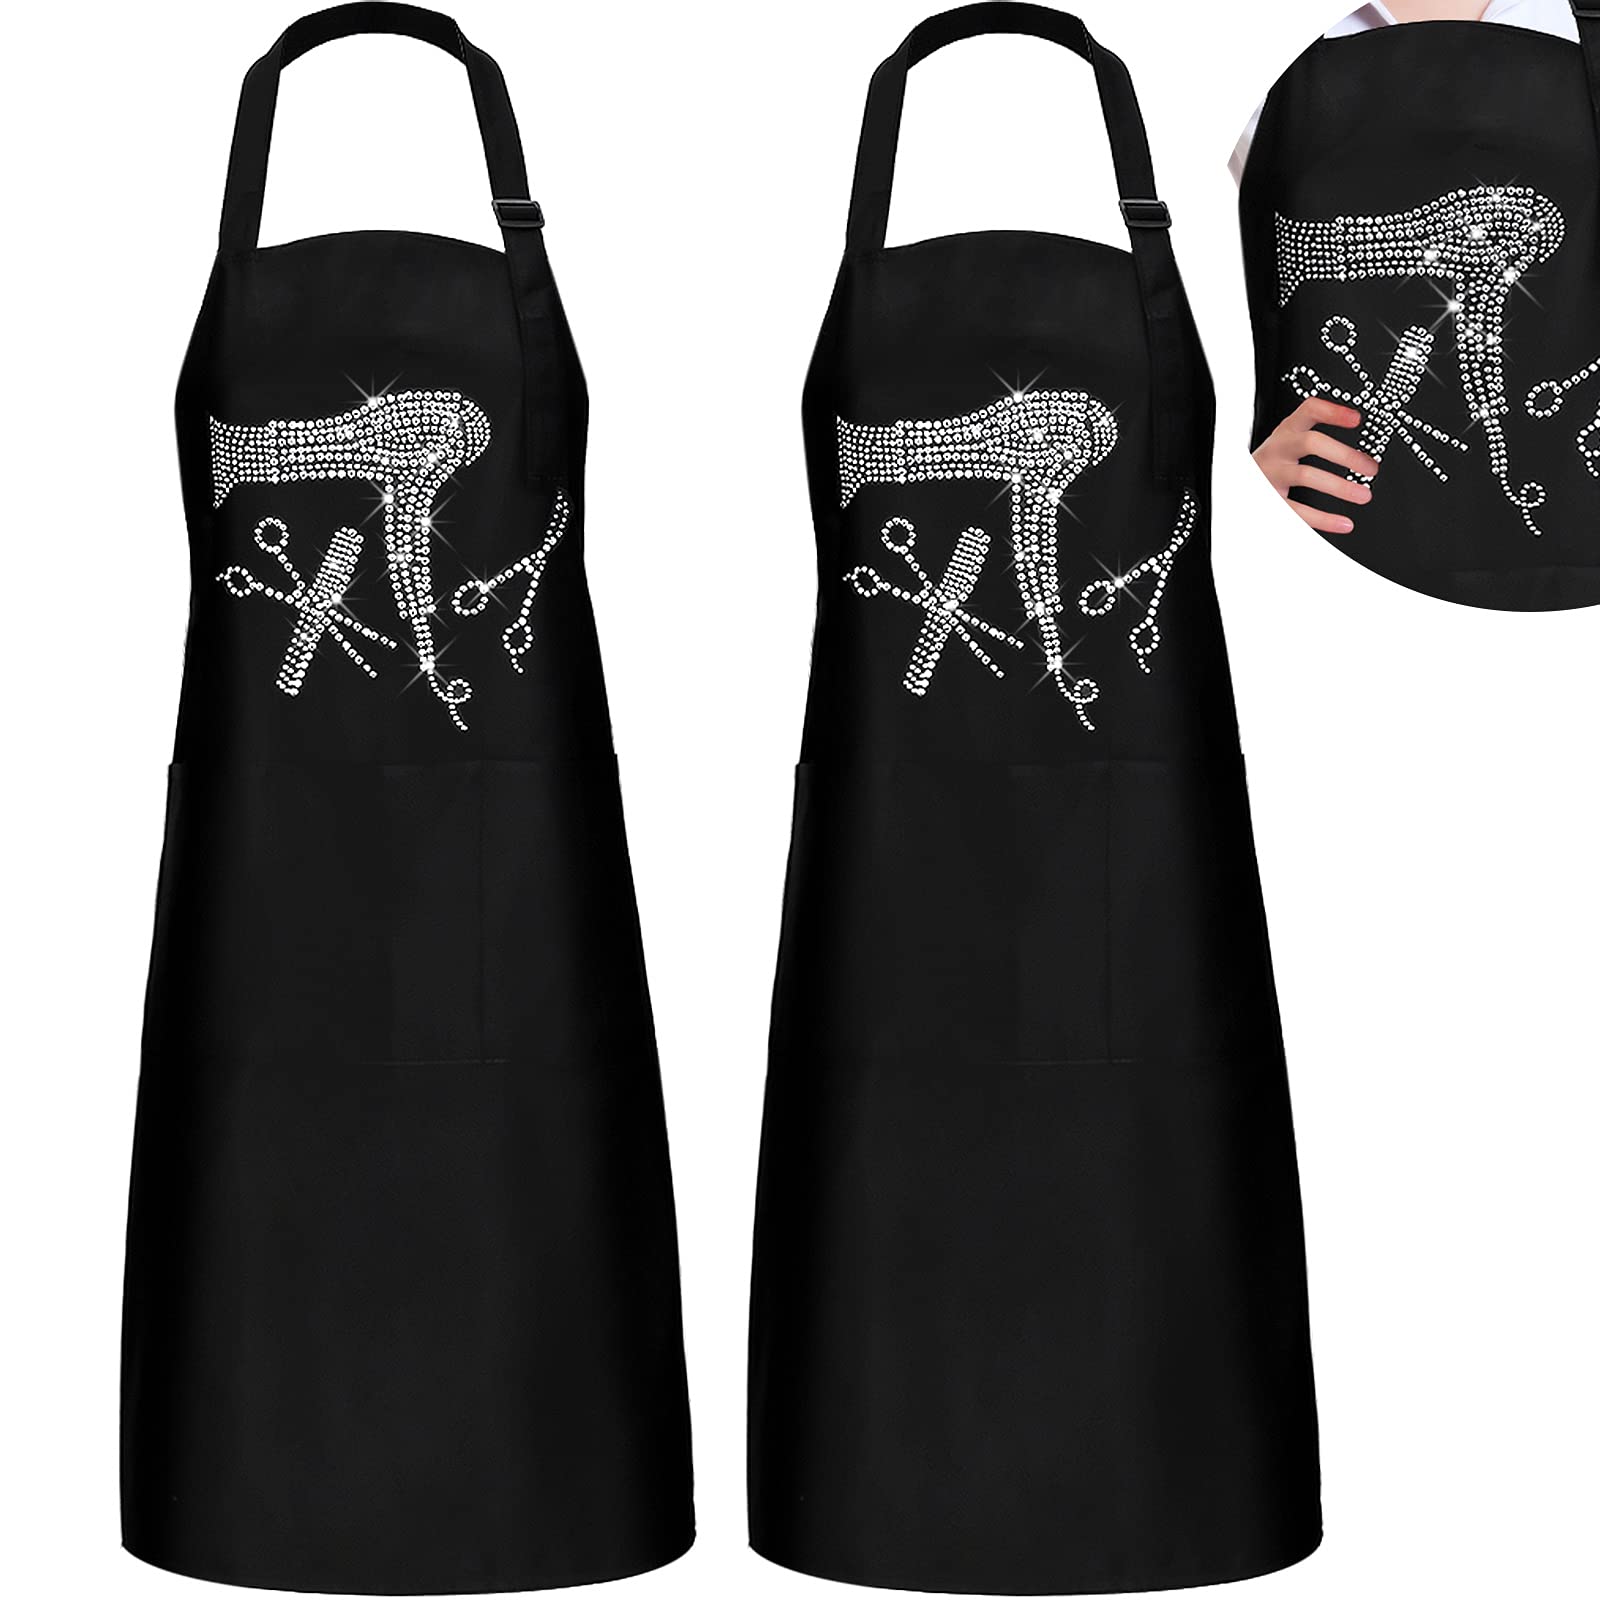 Coume Hair Stylist Apron Hairstylist Salon Apron with Rhinestone Tools and  3 Pockets Waterproof Hairdresser Barber Aprons Hair Dryer Style